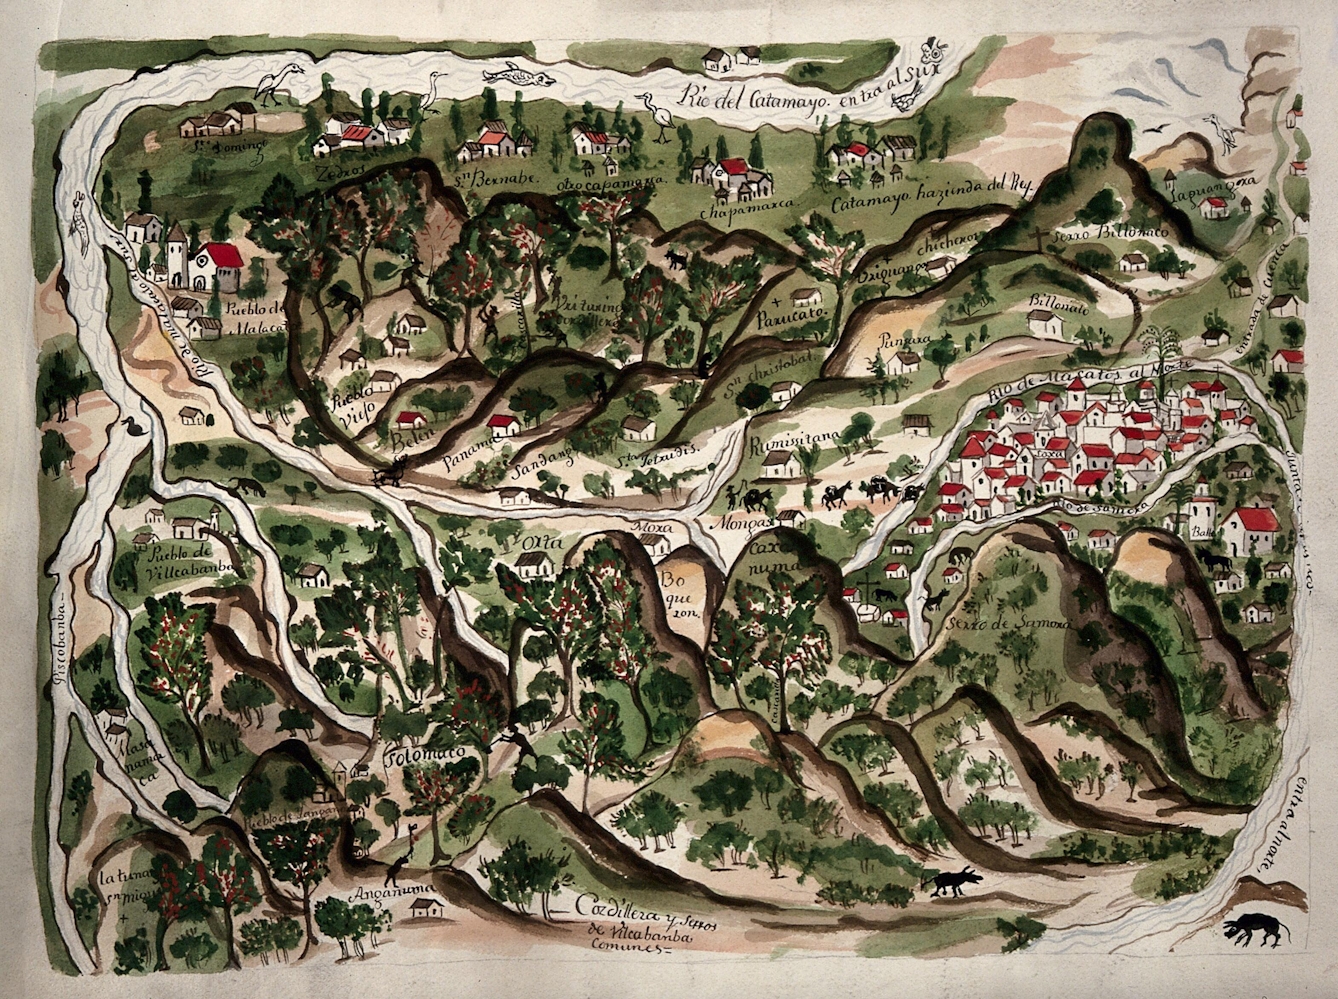 A map of the area of Villcabamba, Ecuador, illustrated with buildings, rivers, people, animals and flowering plants and trees. Watercolour. 1934